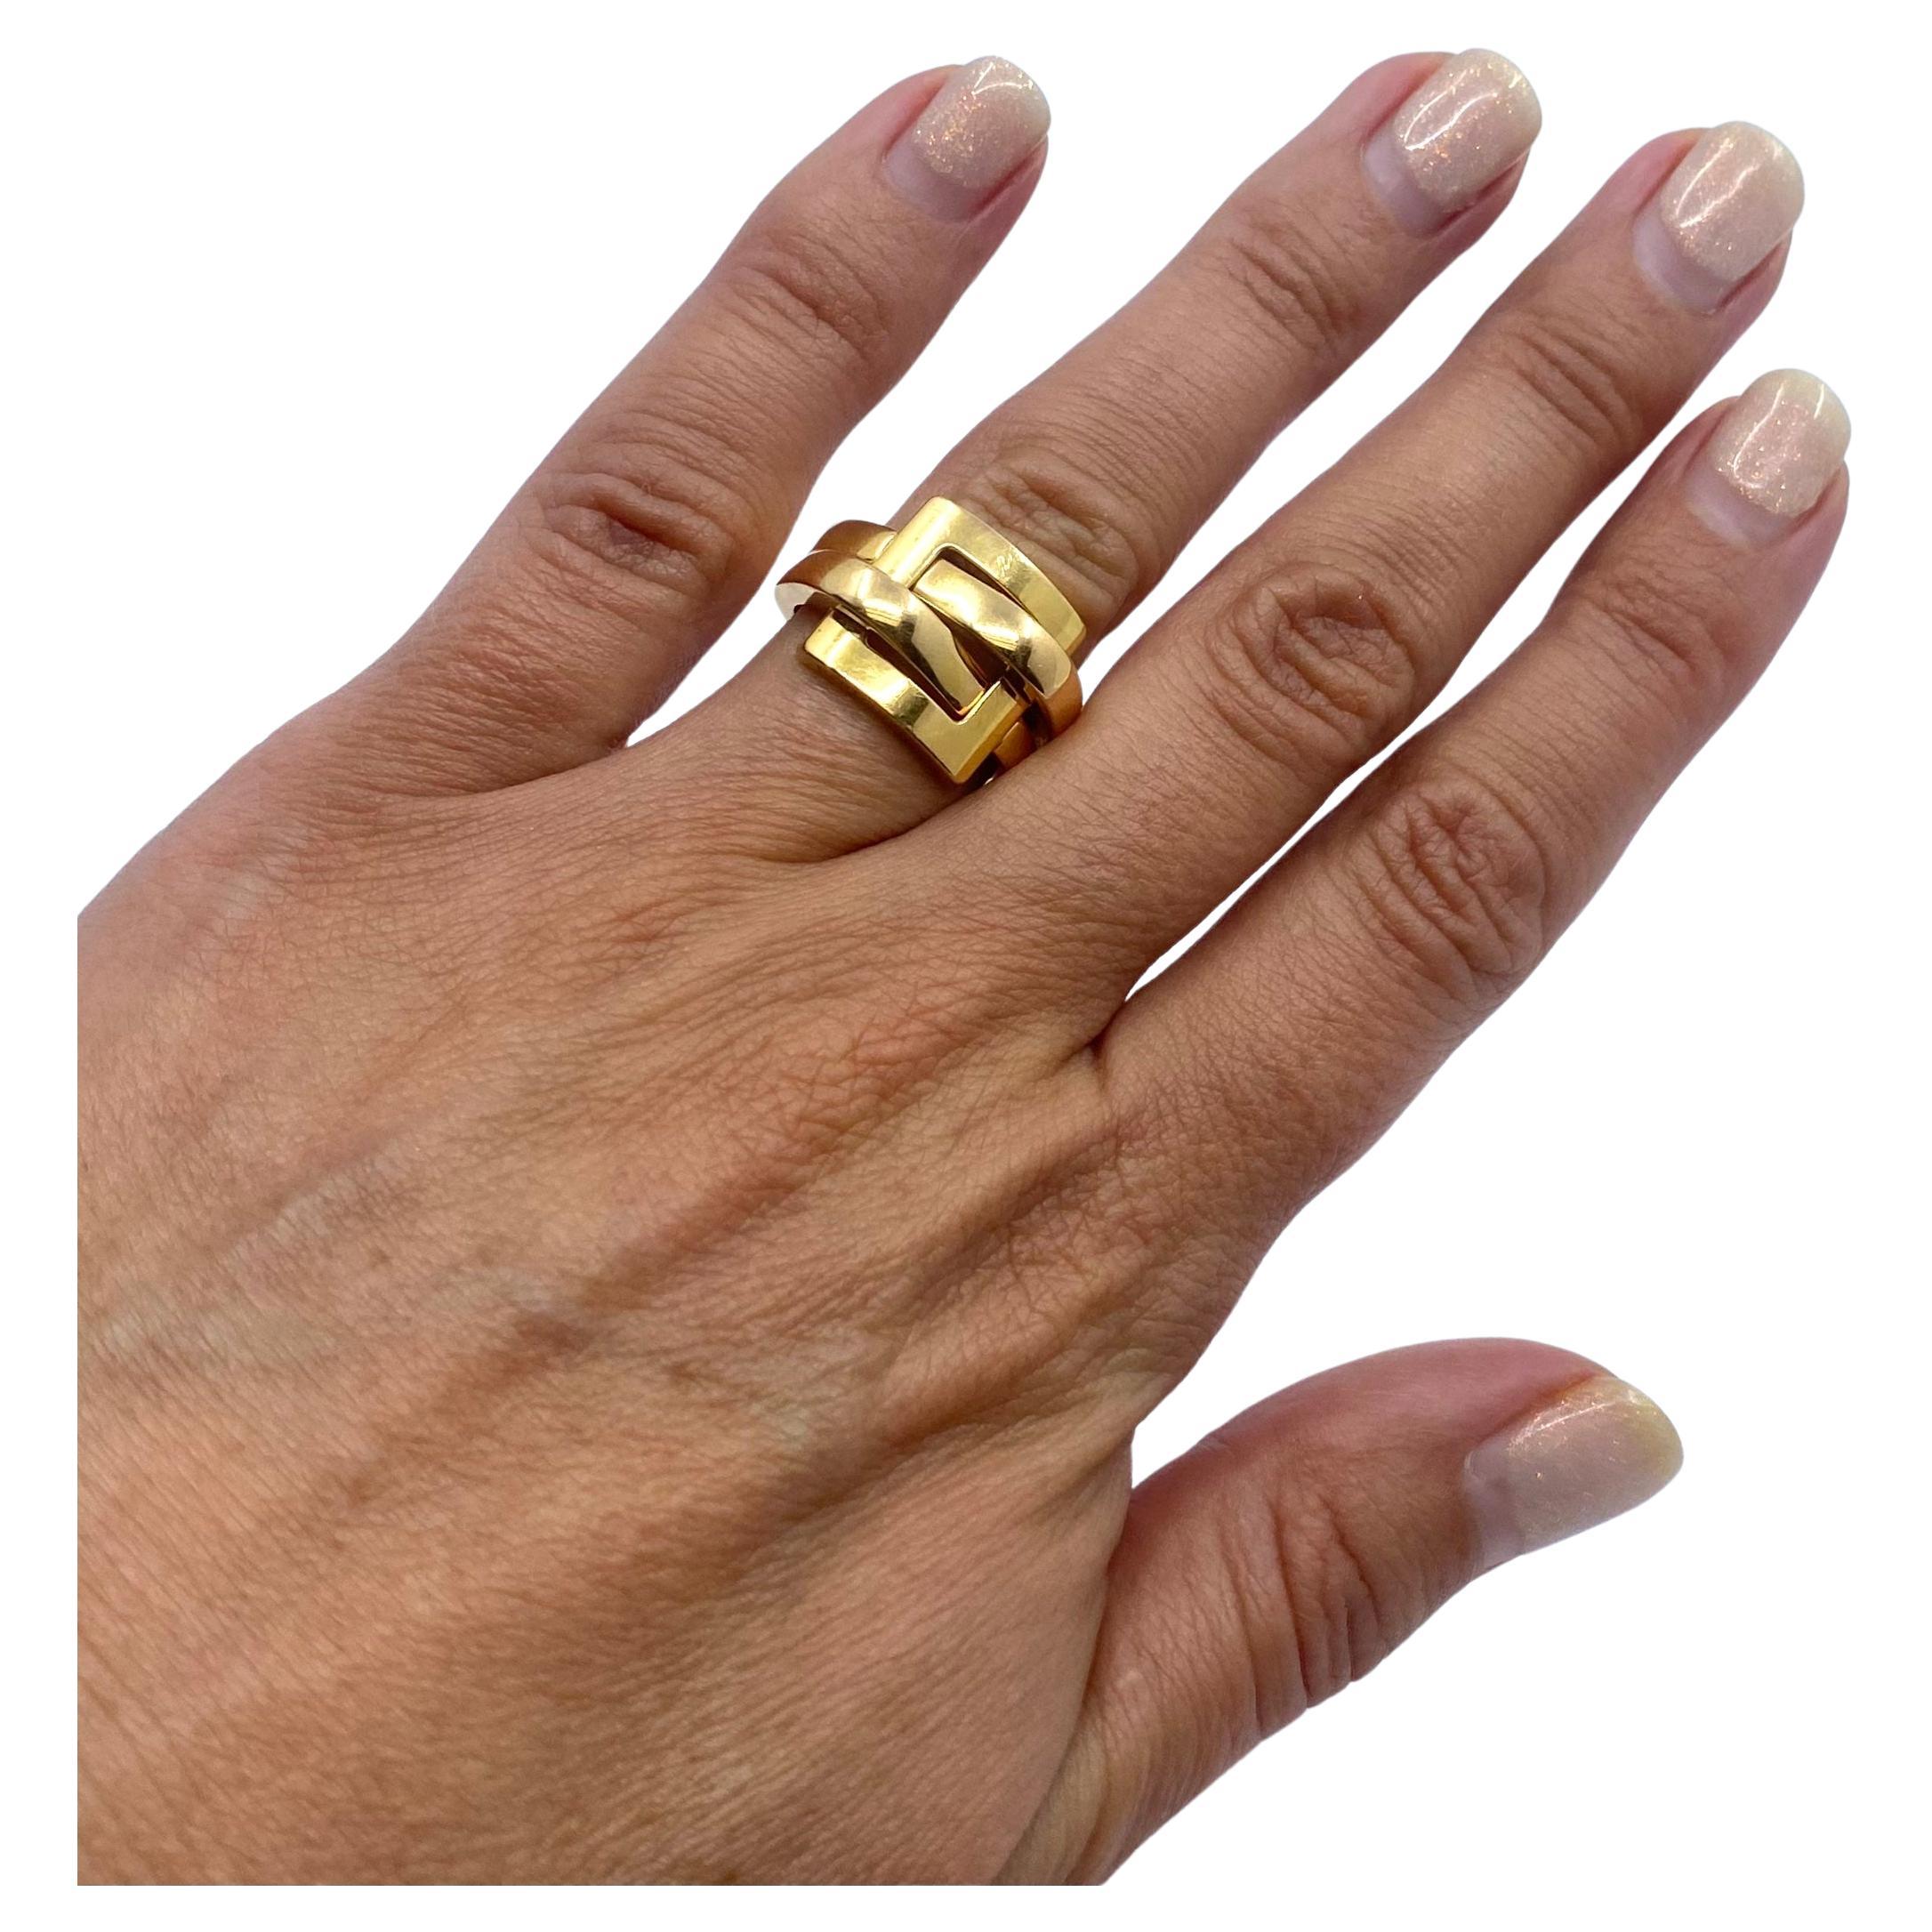 A Boucheron ring of buckle design, made in 18k gold.  The design consists of two polished gold loops that go through the square buckle and create the shank. This combo of the straight buckle’s lines and round loops makes the ring look unique. Being